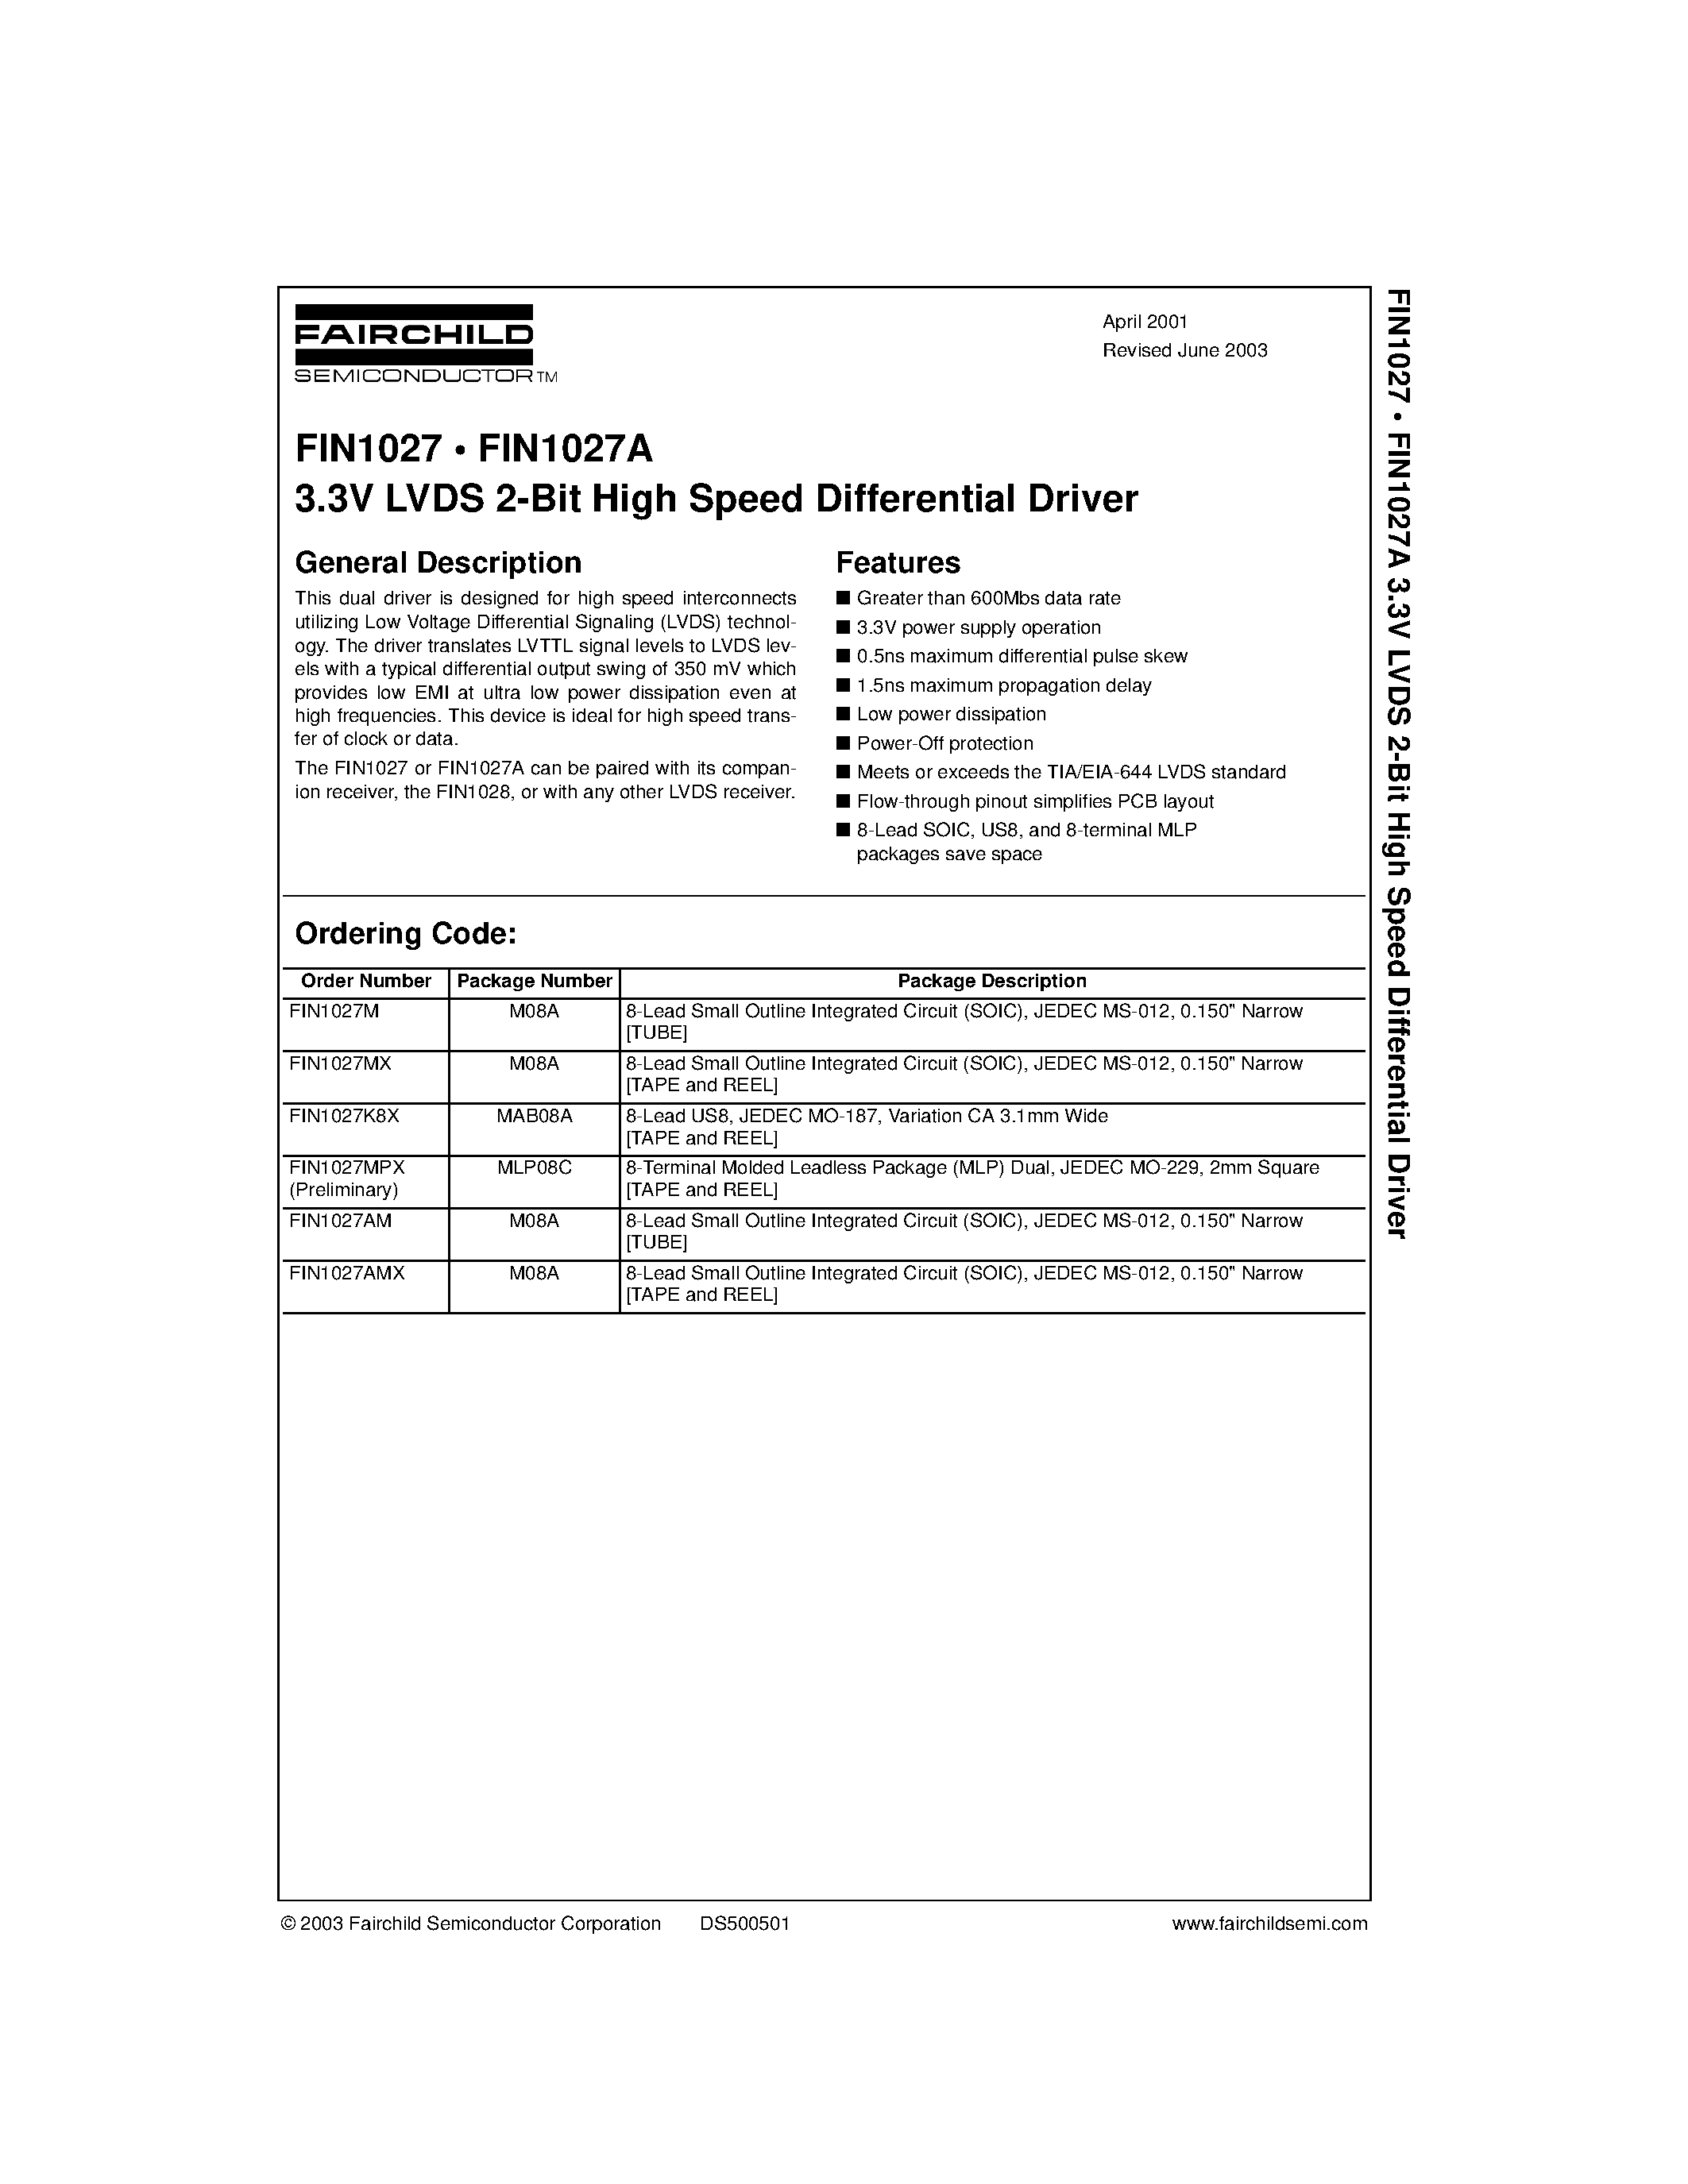 Datasheet FIN1027M - 3.3V LVDS 2-Bit High Speed Differential Driver page 1